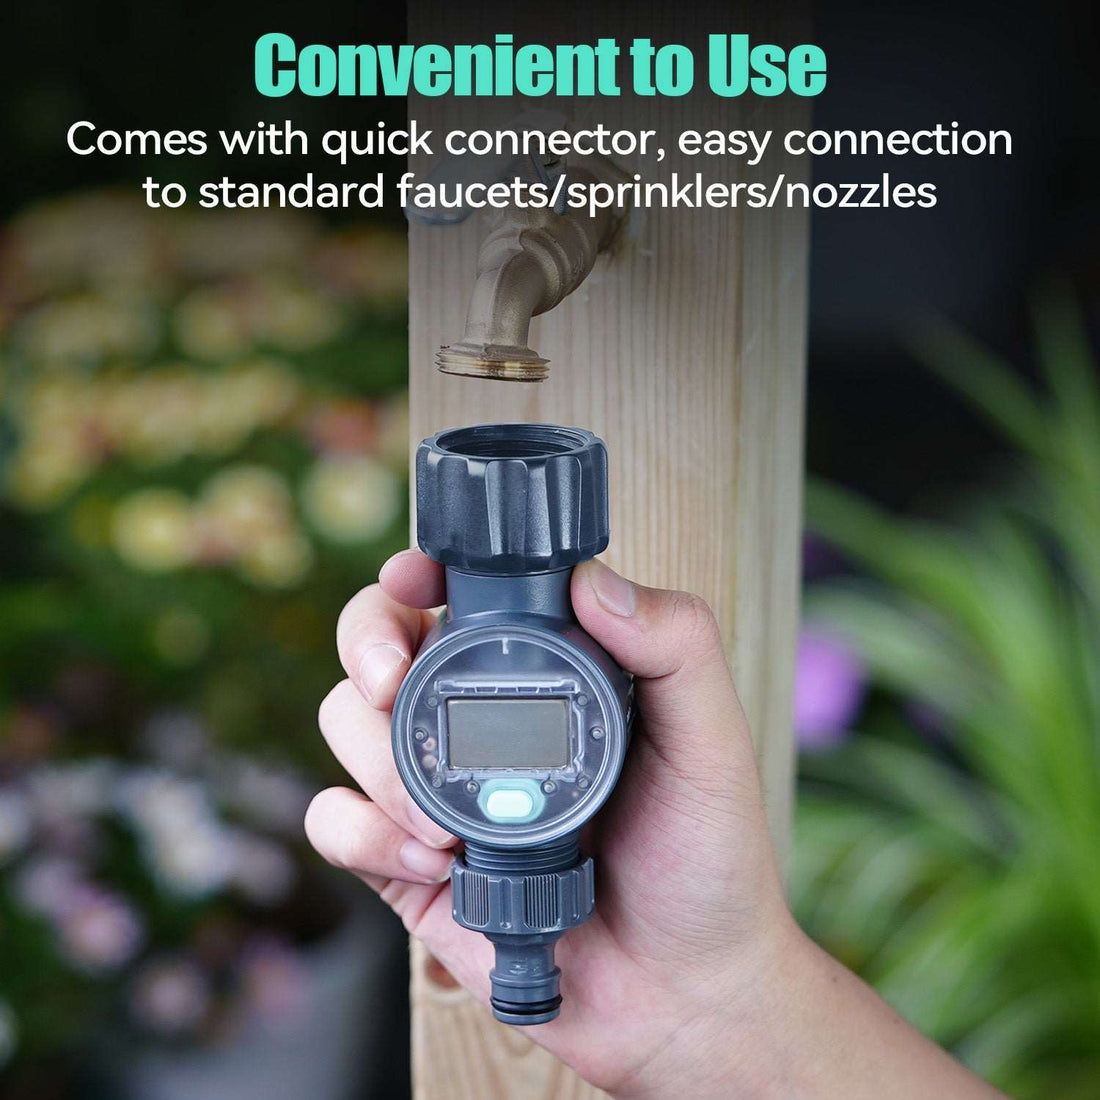 Convenientto Use Comes with quick connector, easy connectionto standard faucets/sprinklers/nozzles